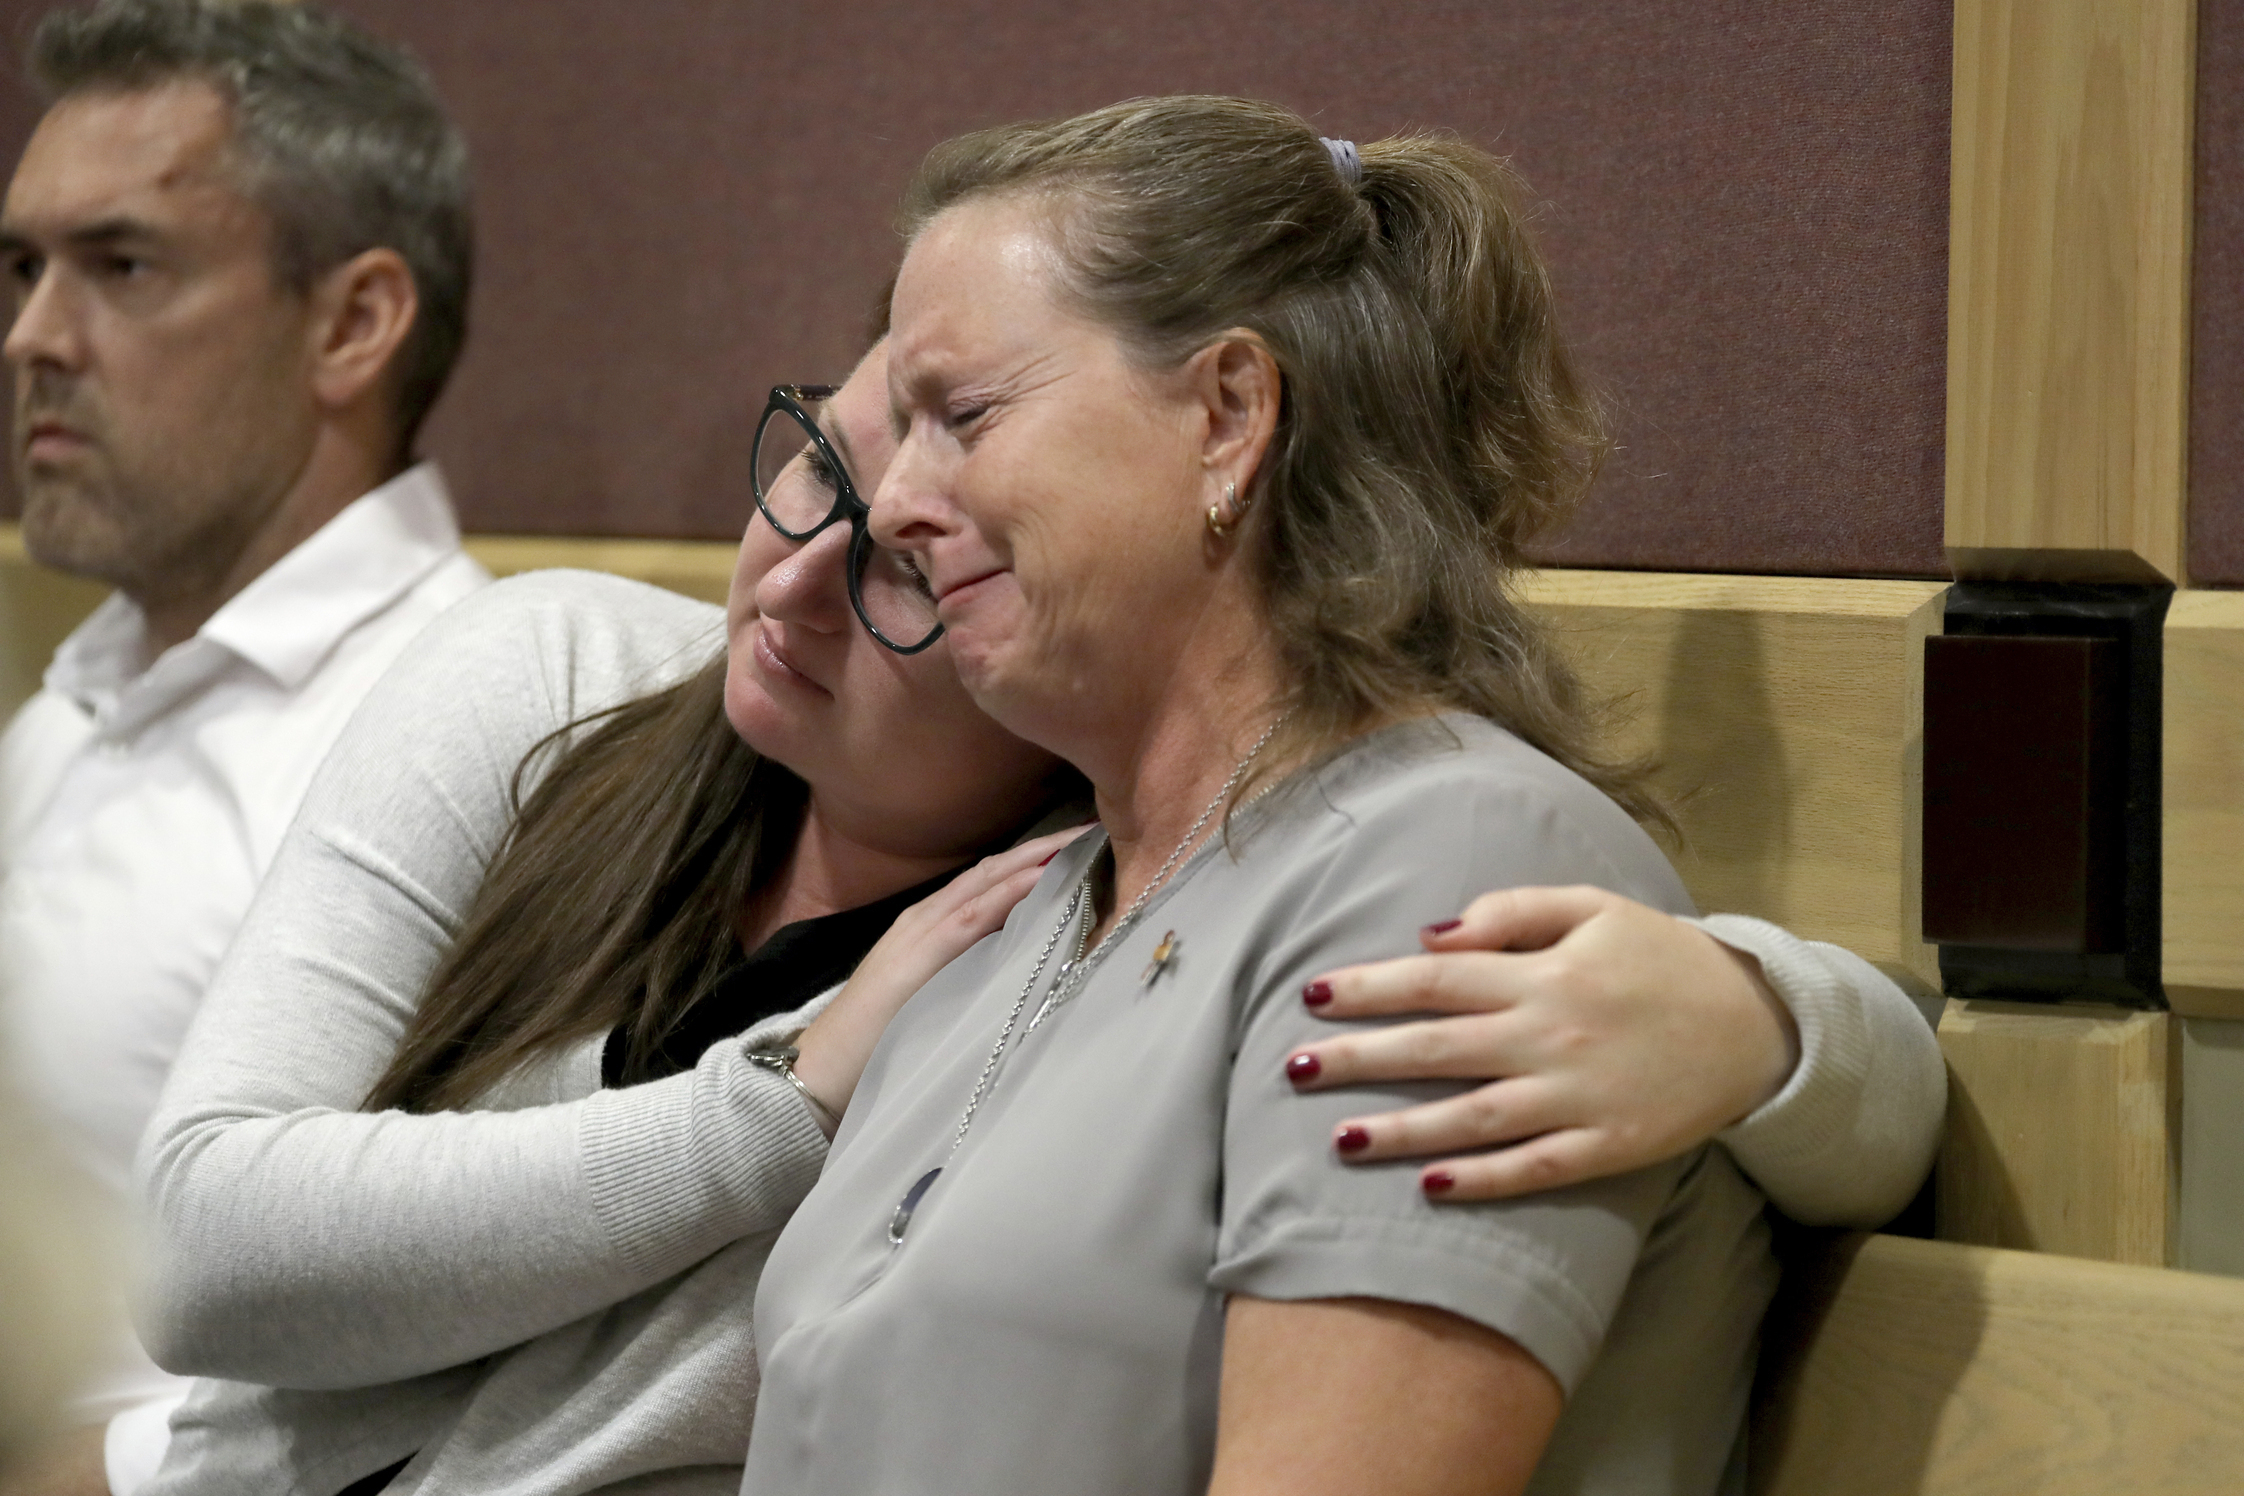 Debbi Hixon, the widow of victim Chris Hixon is consoled in court by close family friend Jennifer Valliere during a hearing for Parkland school shooting suspect Nikolas Cruz. 